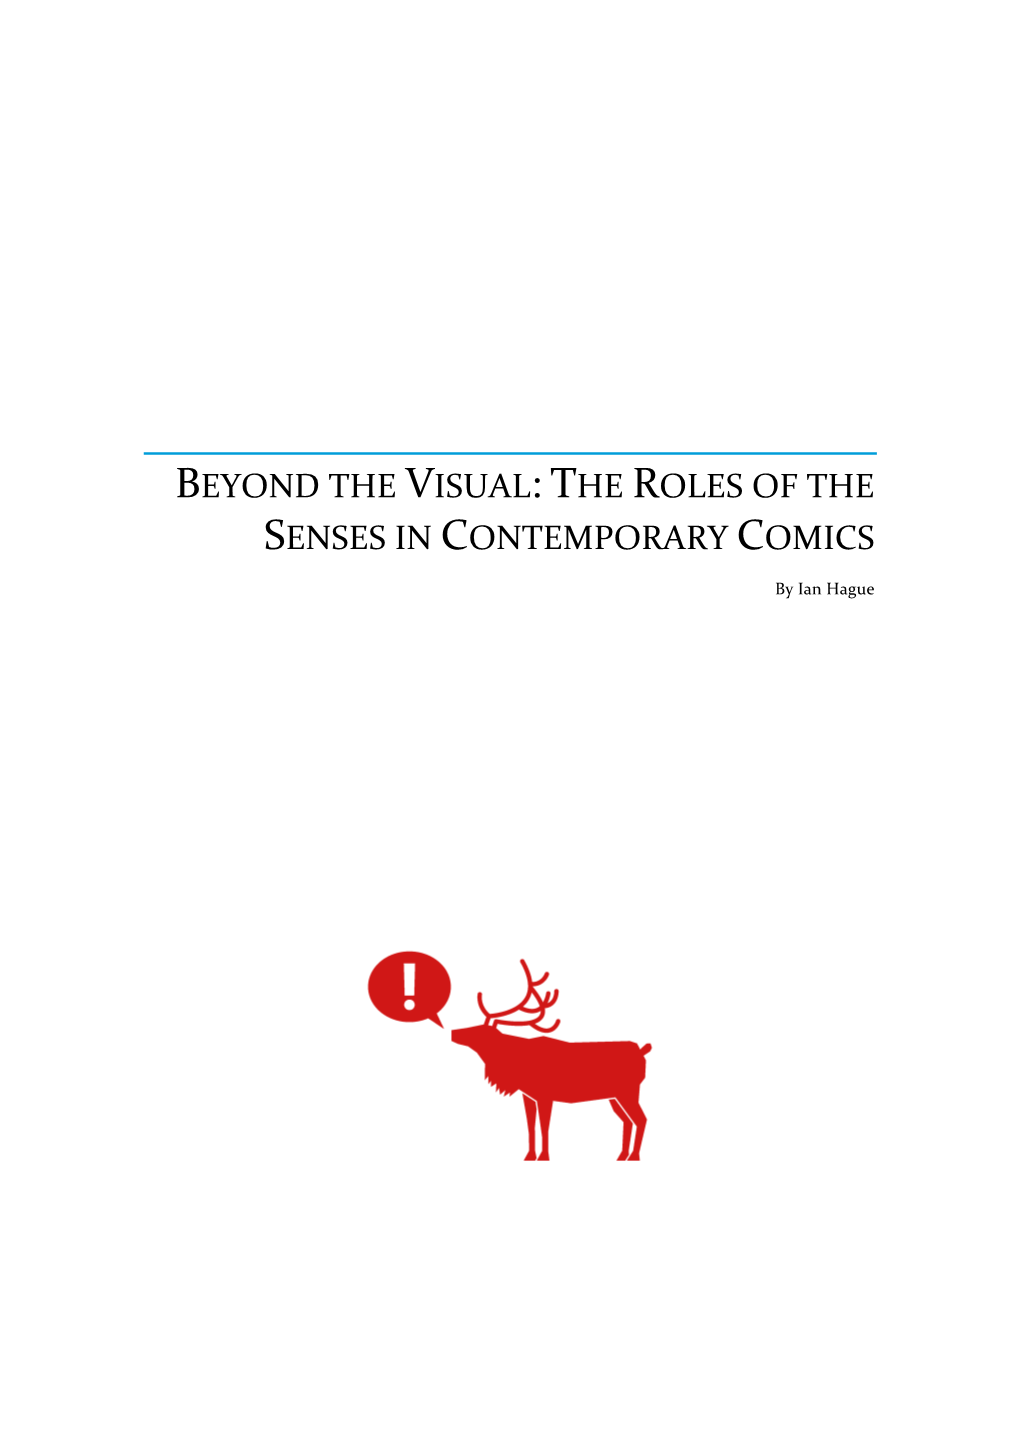 The Roles of the Senses in Contemporary Comics